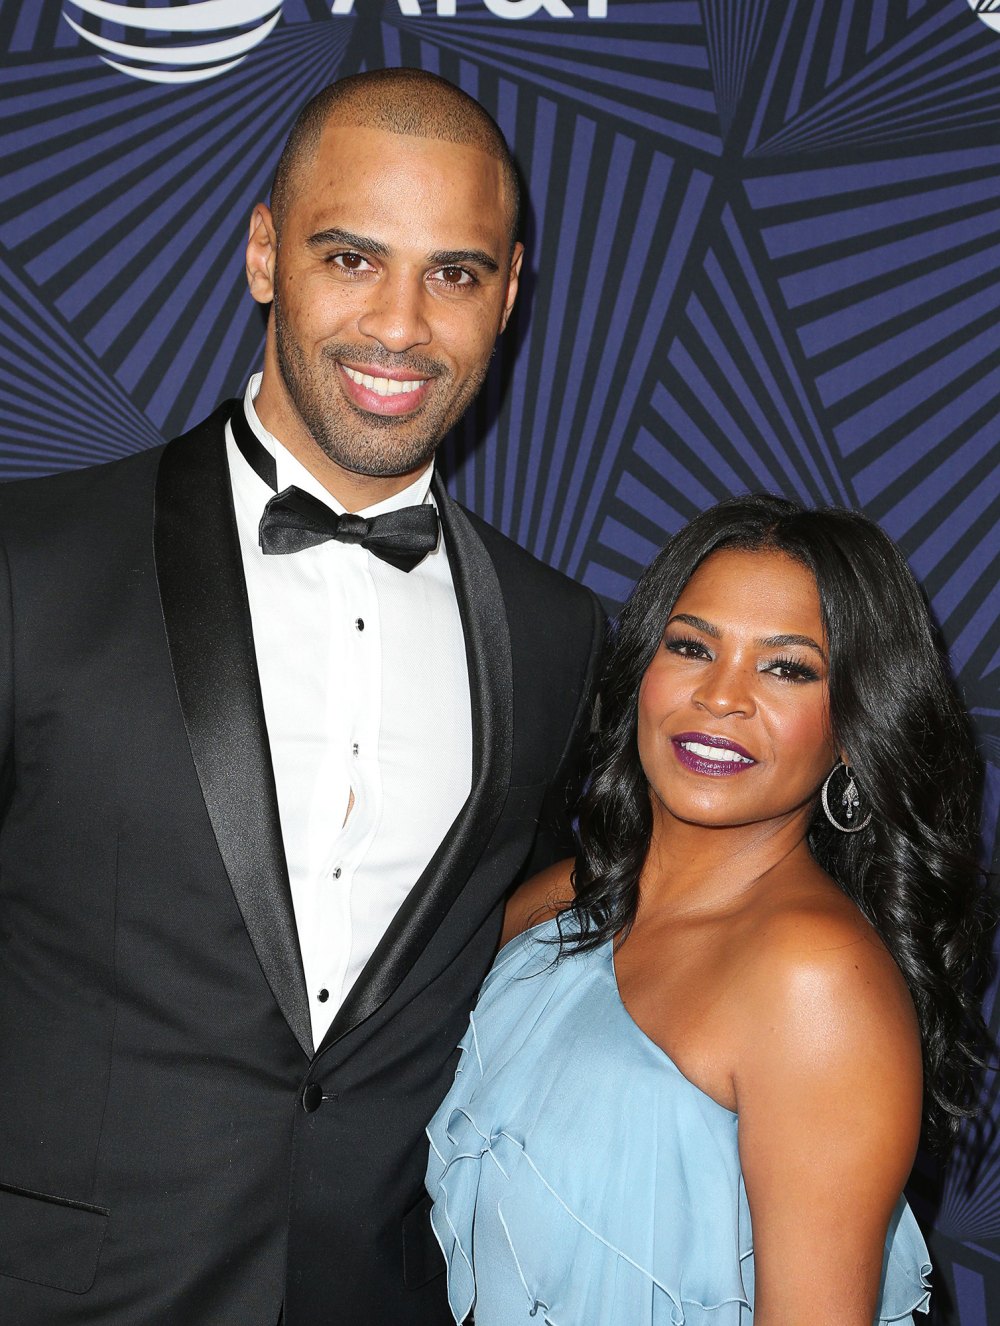 Nia Long Says Ime Udoka Affair Was 'Devastating' for Son Kez, Calls Out 'Disappointing' Response From Boston Celtics 529 Ime Udoka, Nia Long. ABFF Honors, Arrivals, Los Angeles, USA - 17 Feb 2017